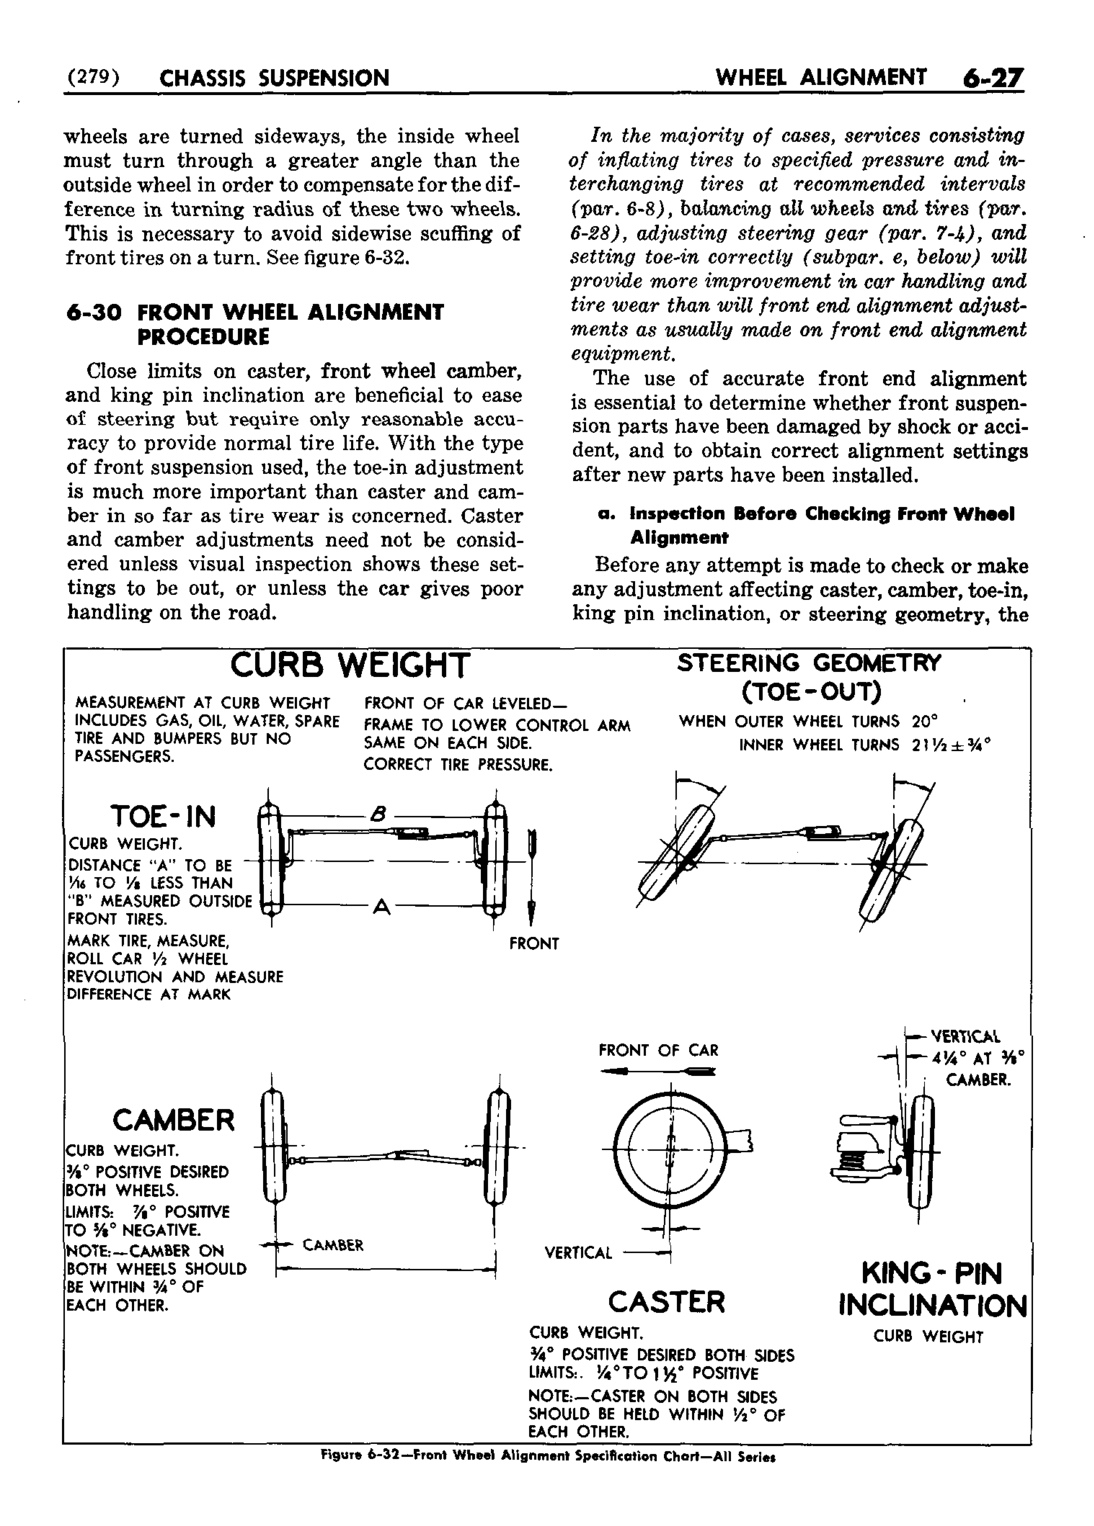 n_07 1952 Buick Shop Manual - Chassis Suspension-027-027.jpg